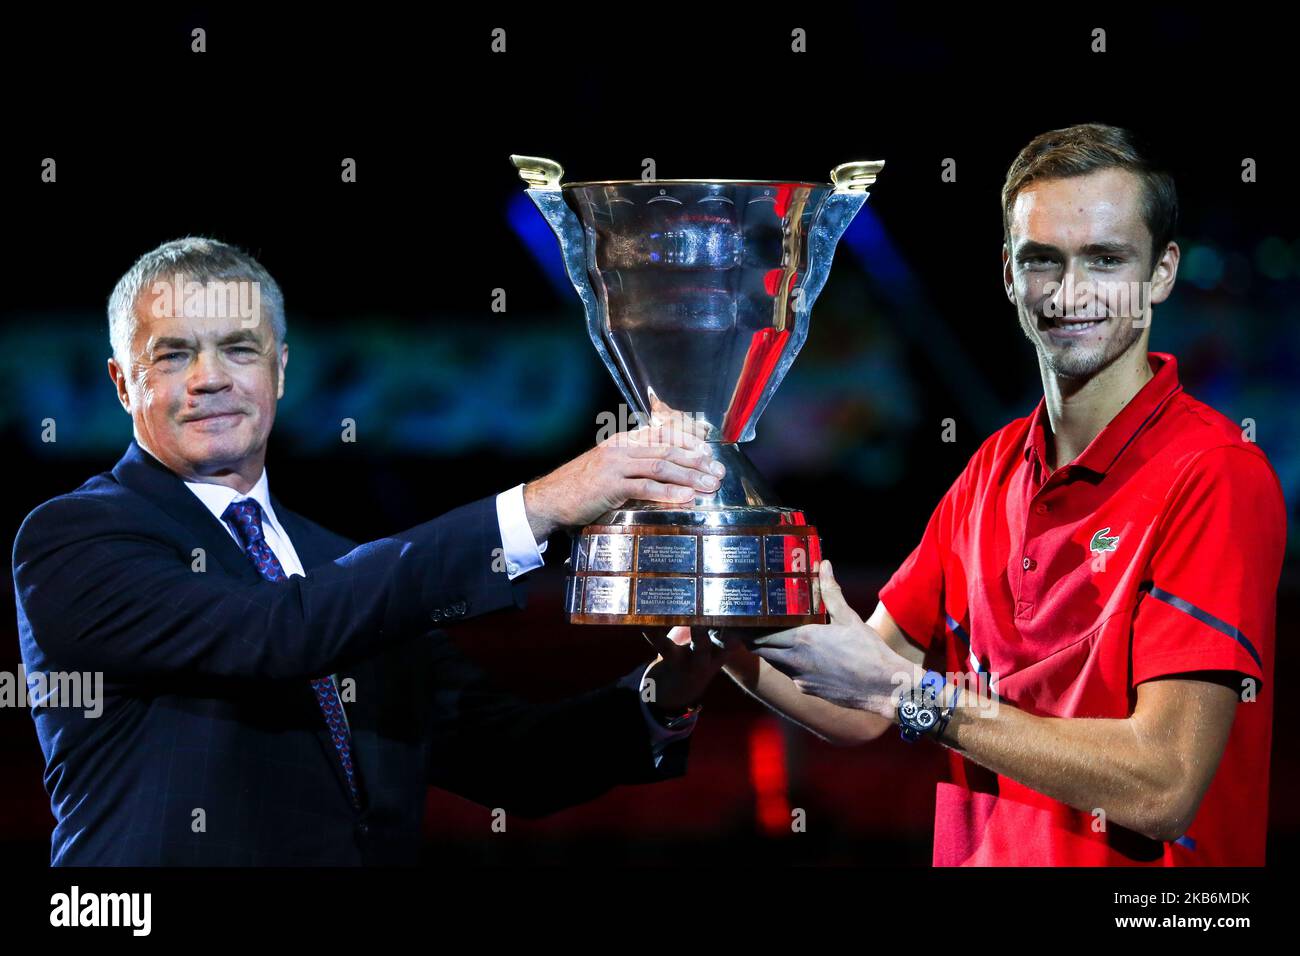 Daniil Medvedev of Russia, right, poses after winning the final